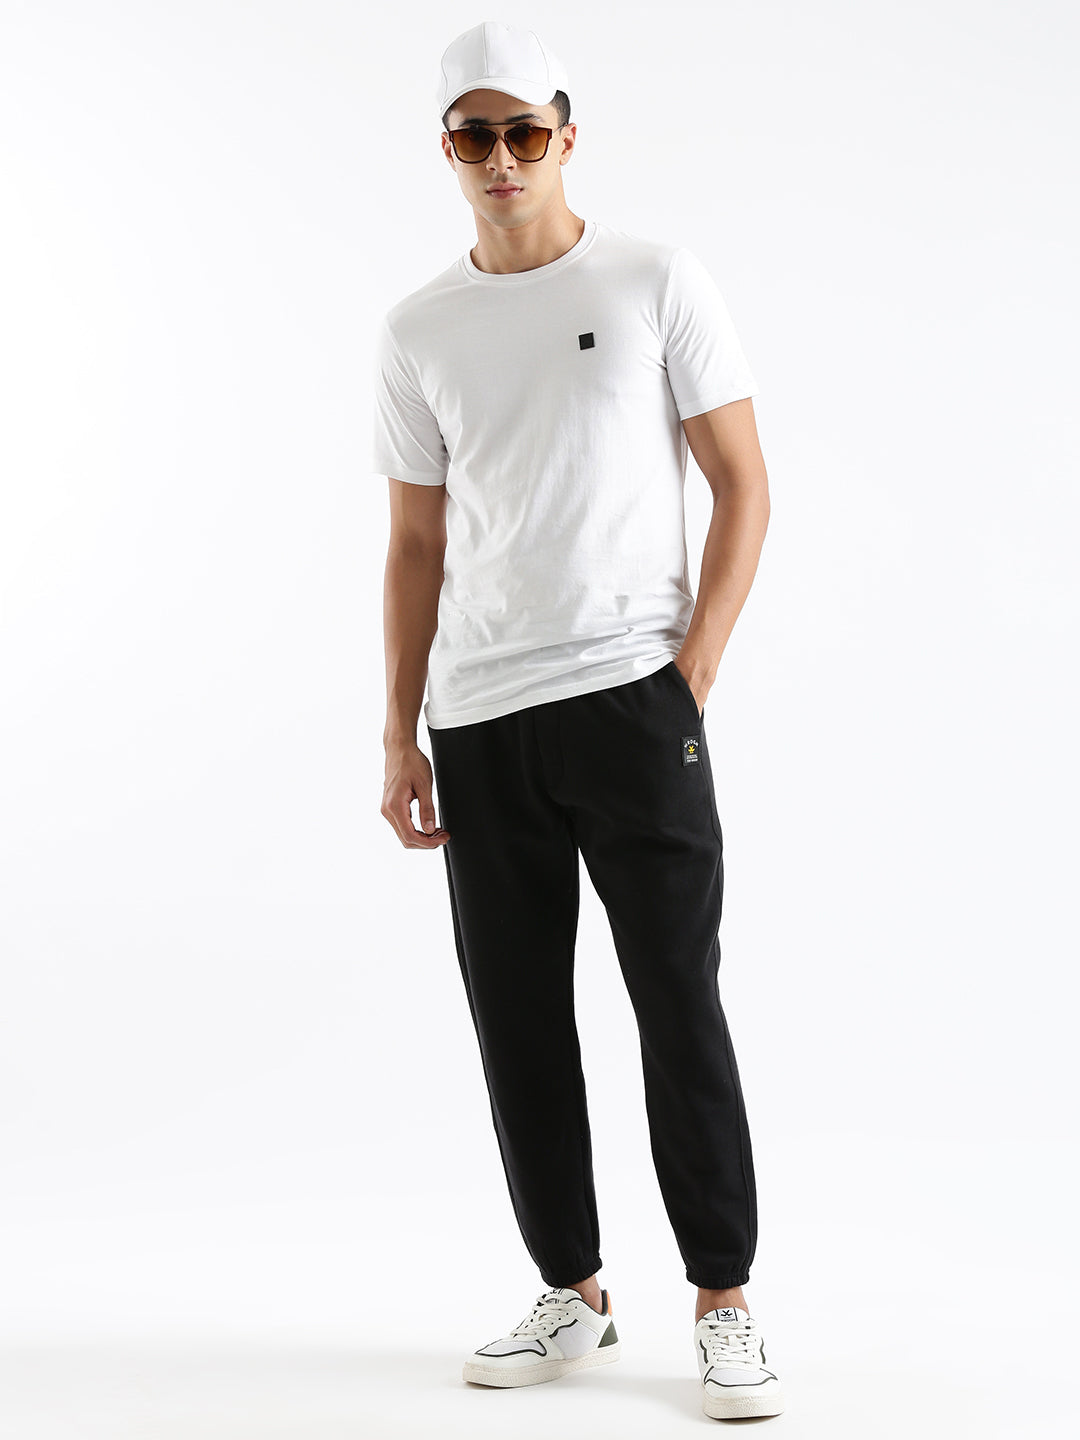 Pitch Black Solid Jogger